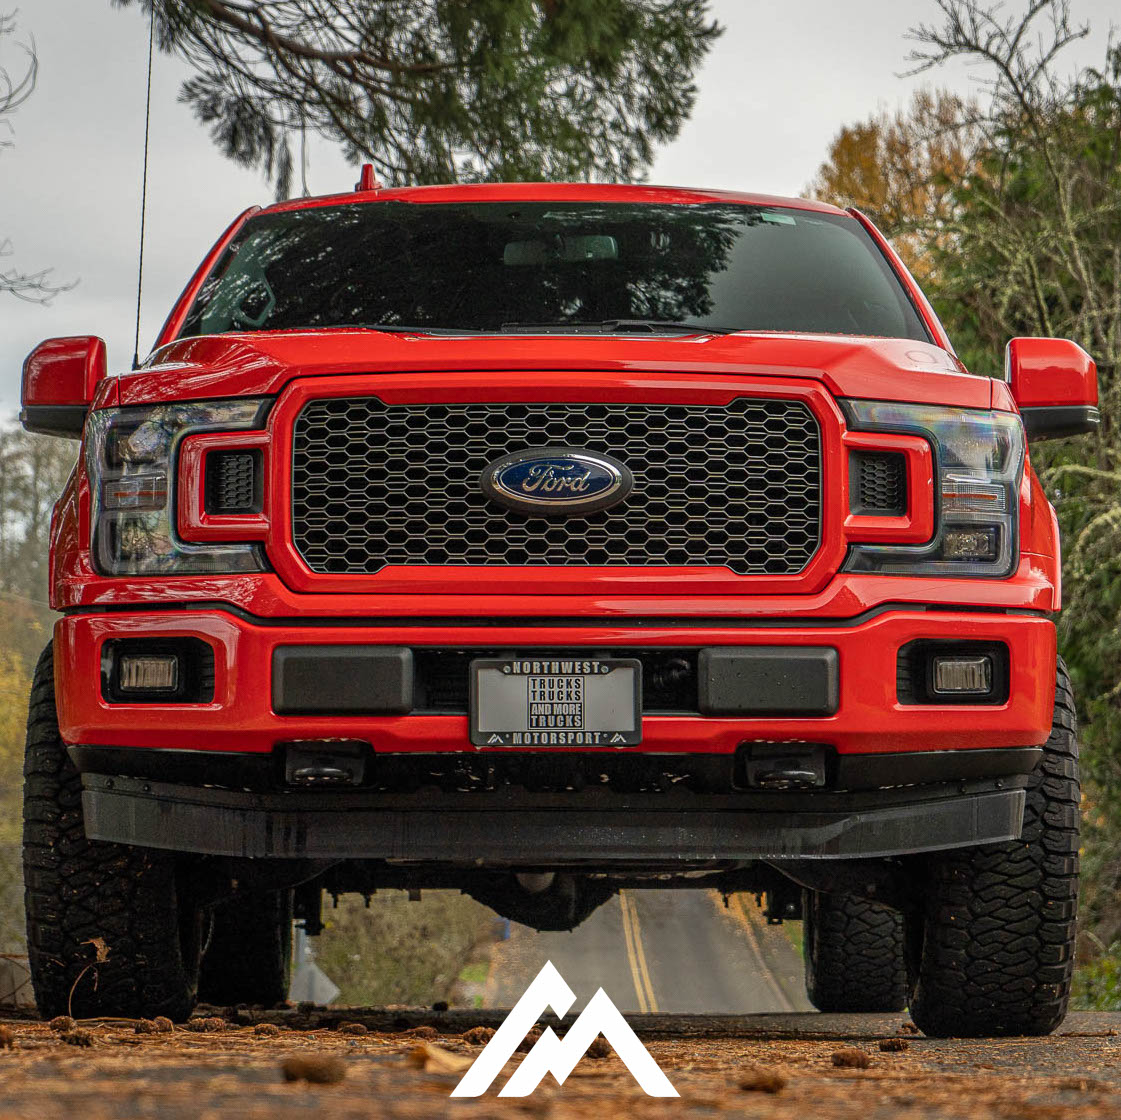 Ever wonder what FX4 means on Ford trucks? Read to find out in the link in bio!